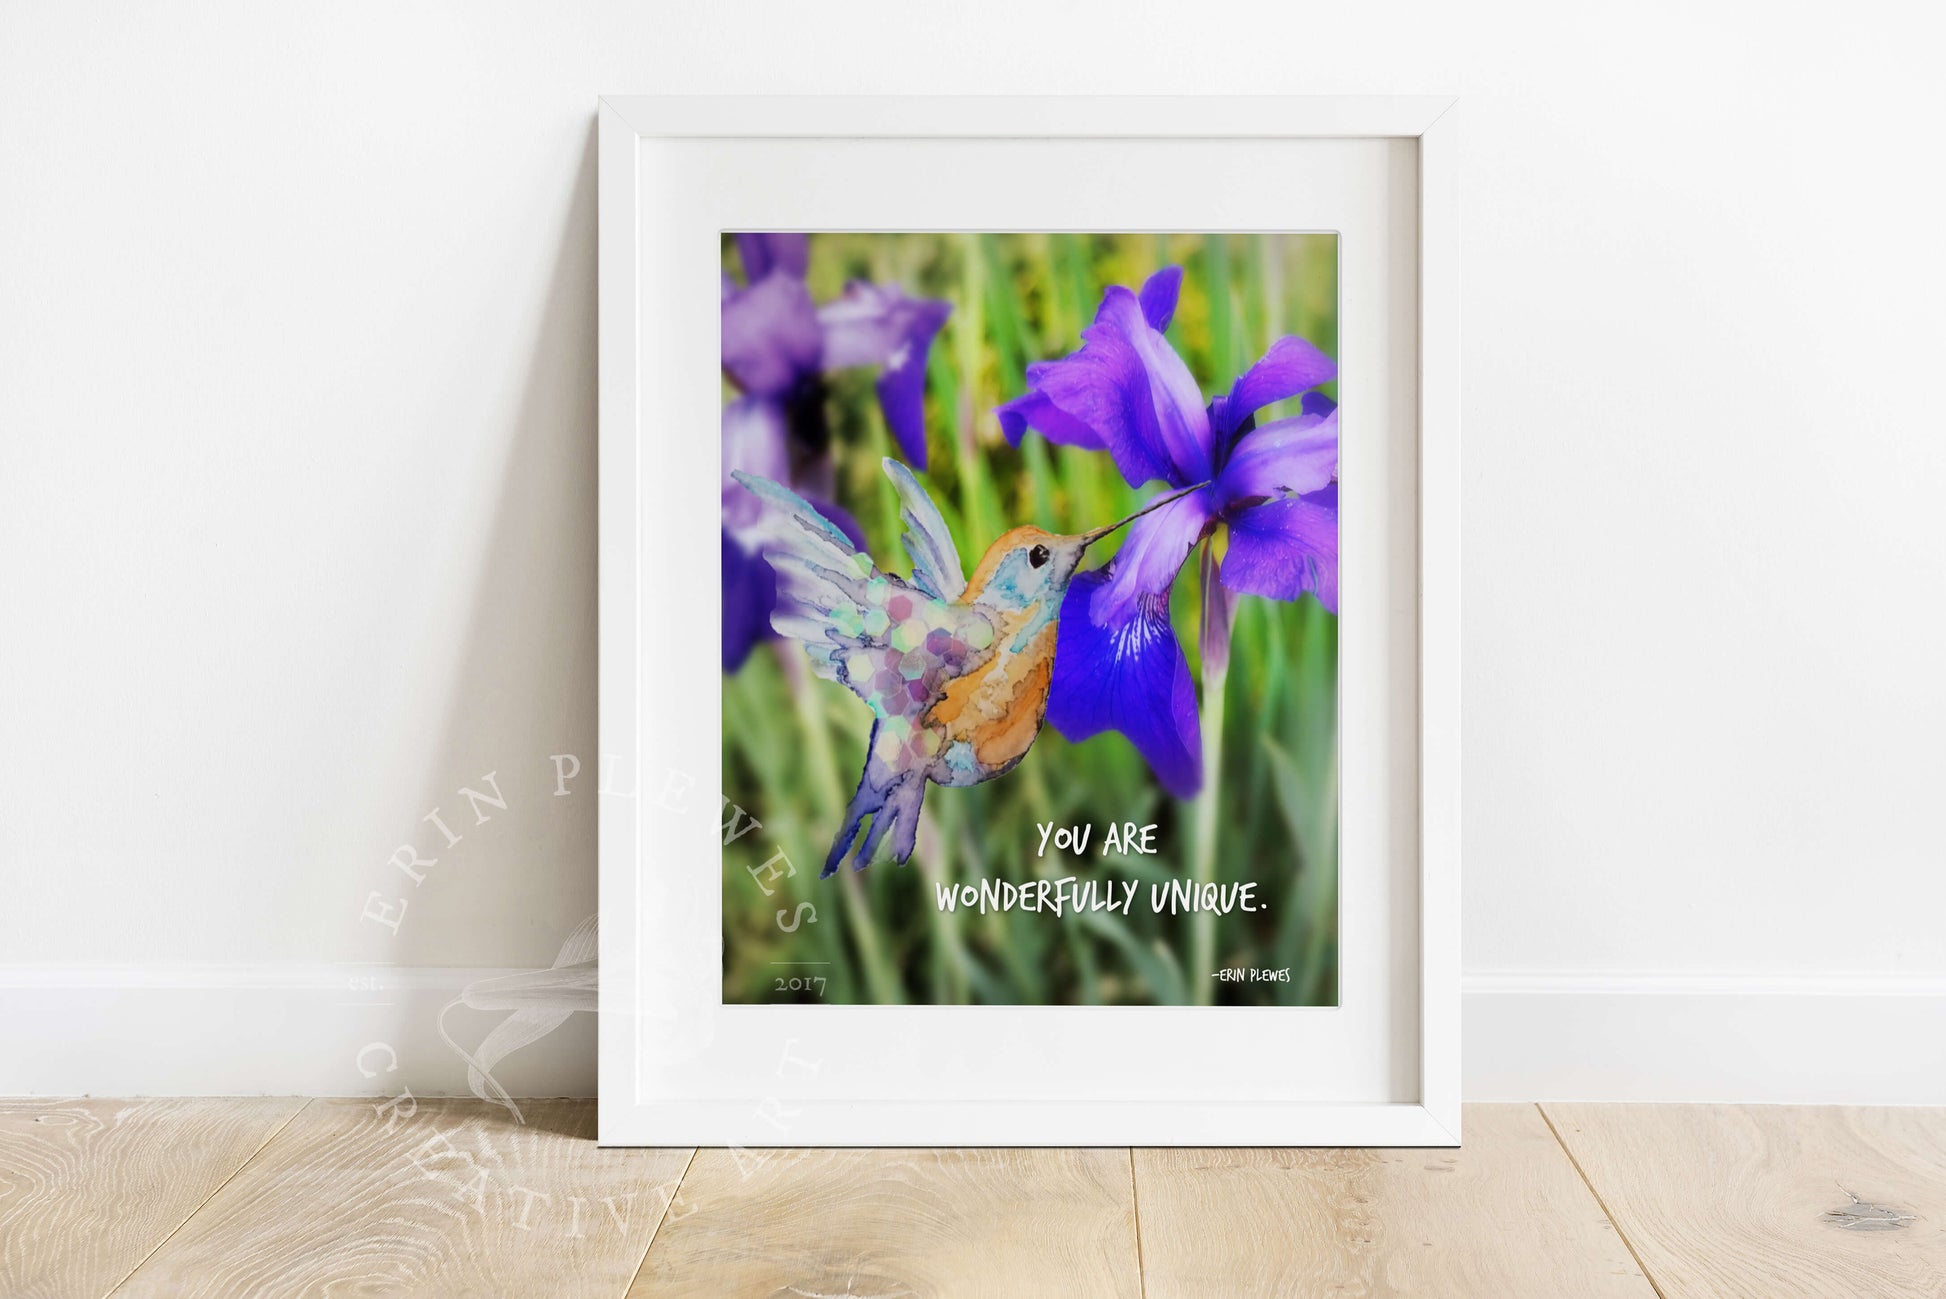 Erin Plewes Creative Art – Wonderfully Unique Iris Bird Wall Art Inspirational Watercolor Framed and Matted Print 8x10